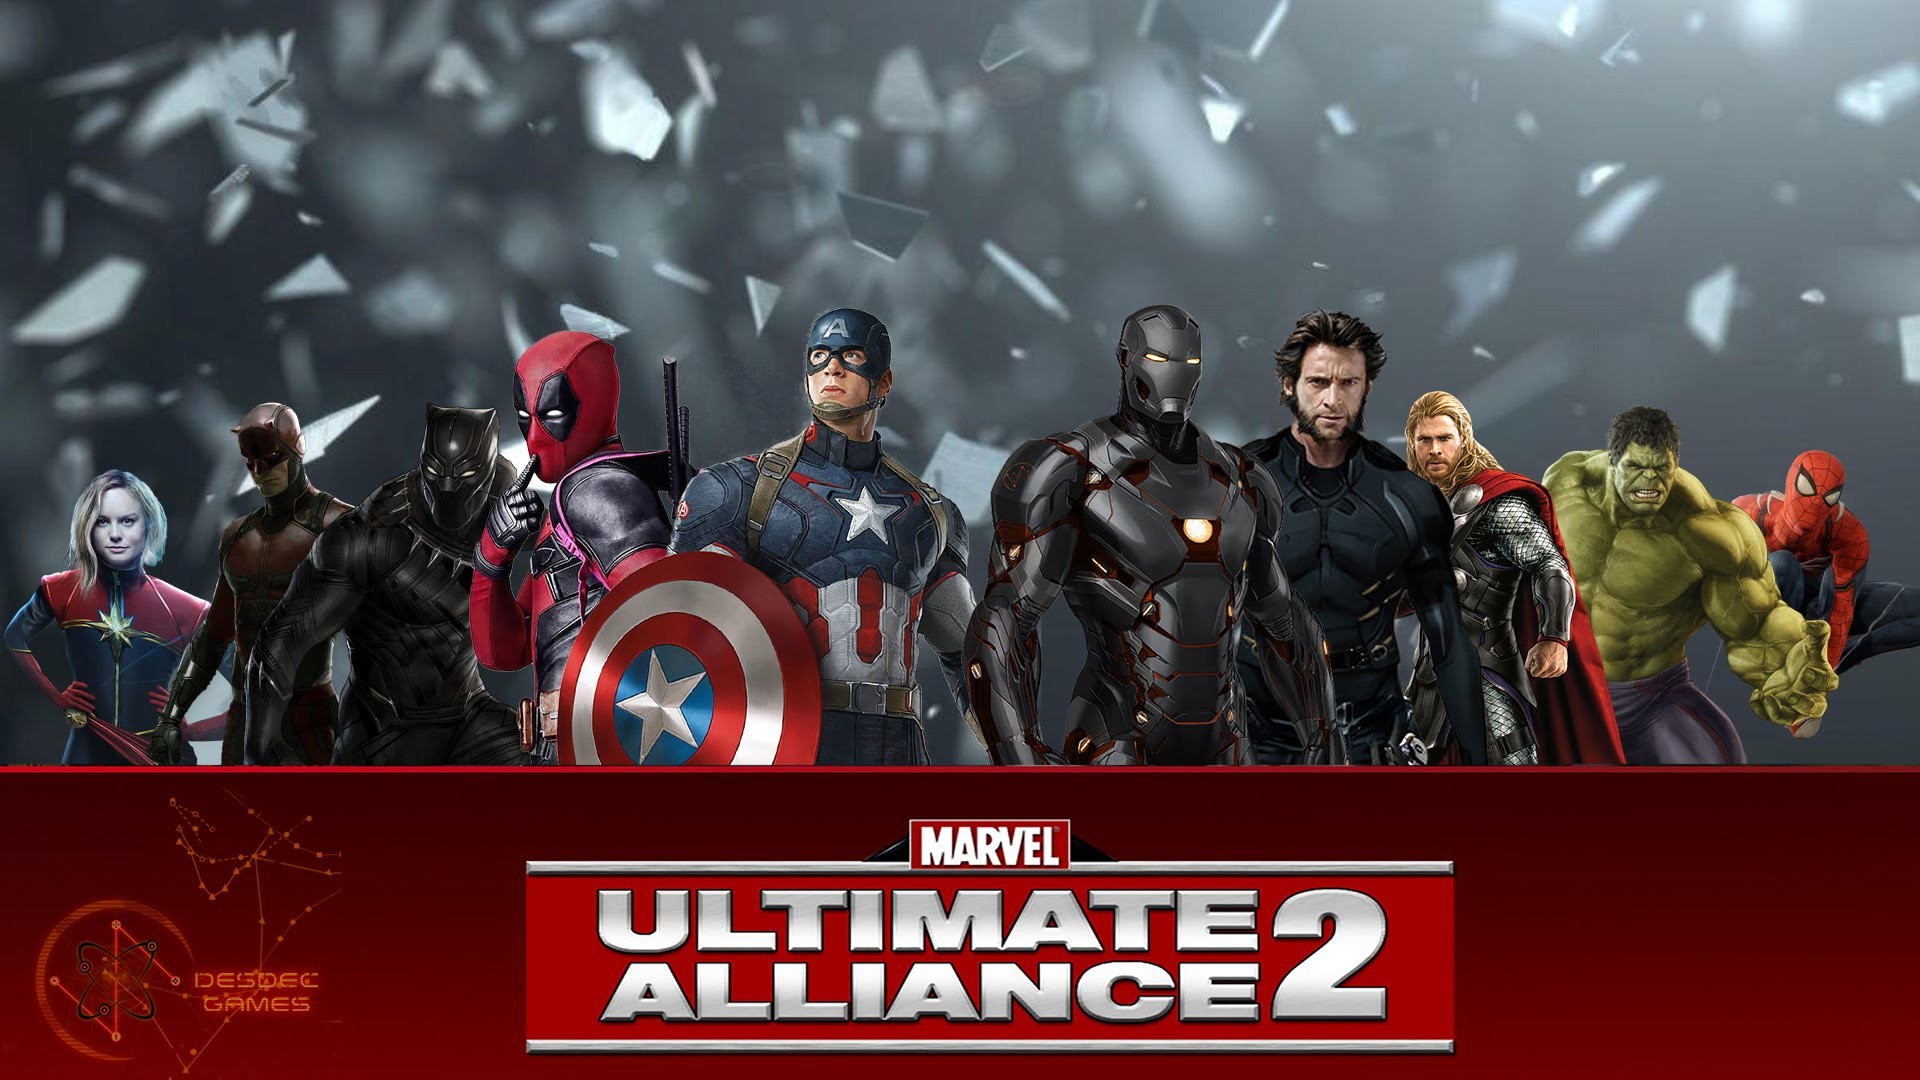 1920x1080 Let's Play Marvel Ultimate Alliance 2 on PS4